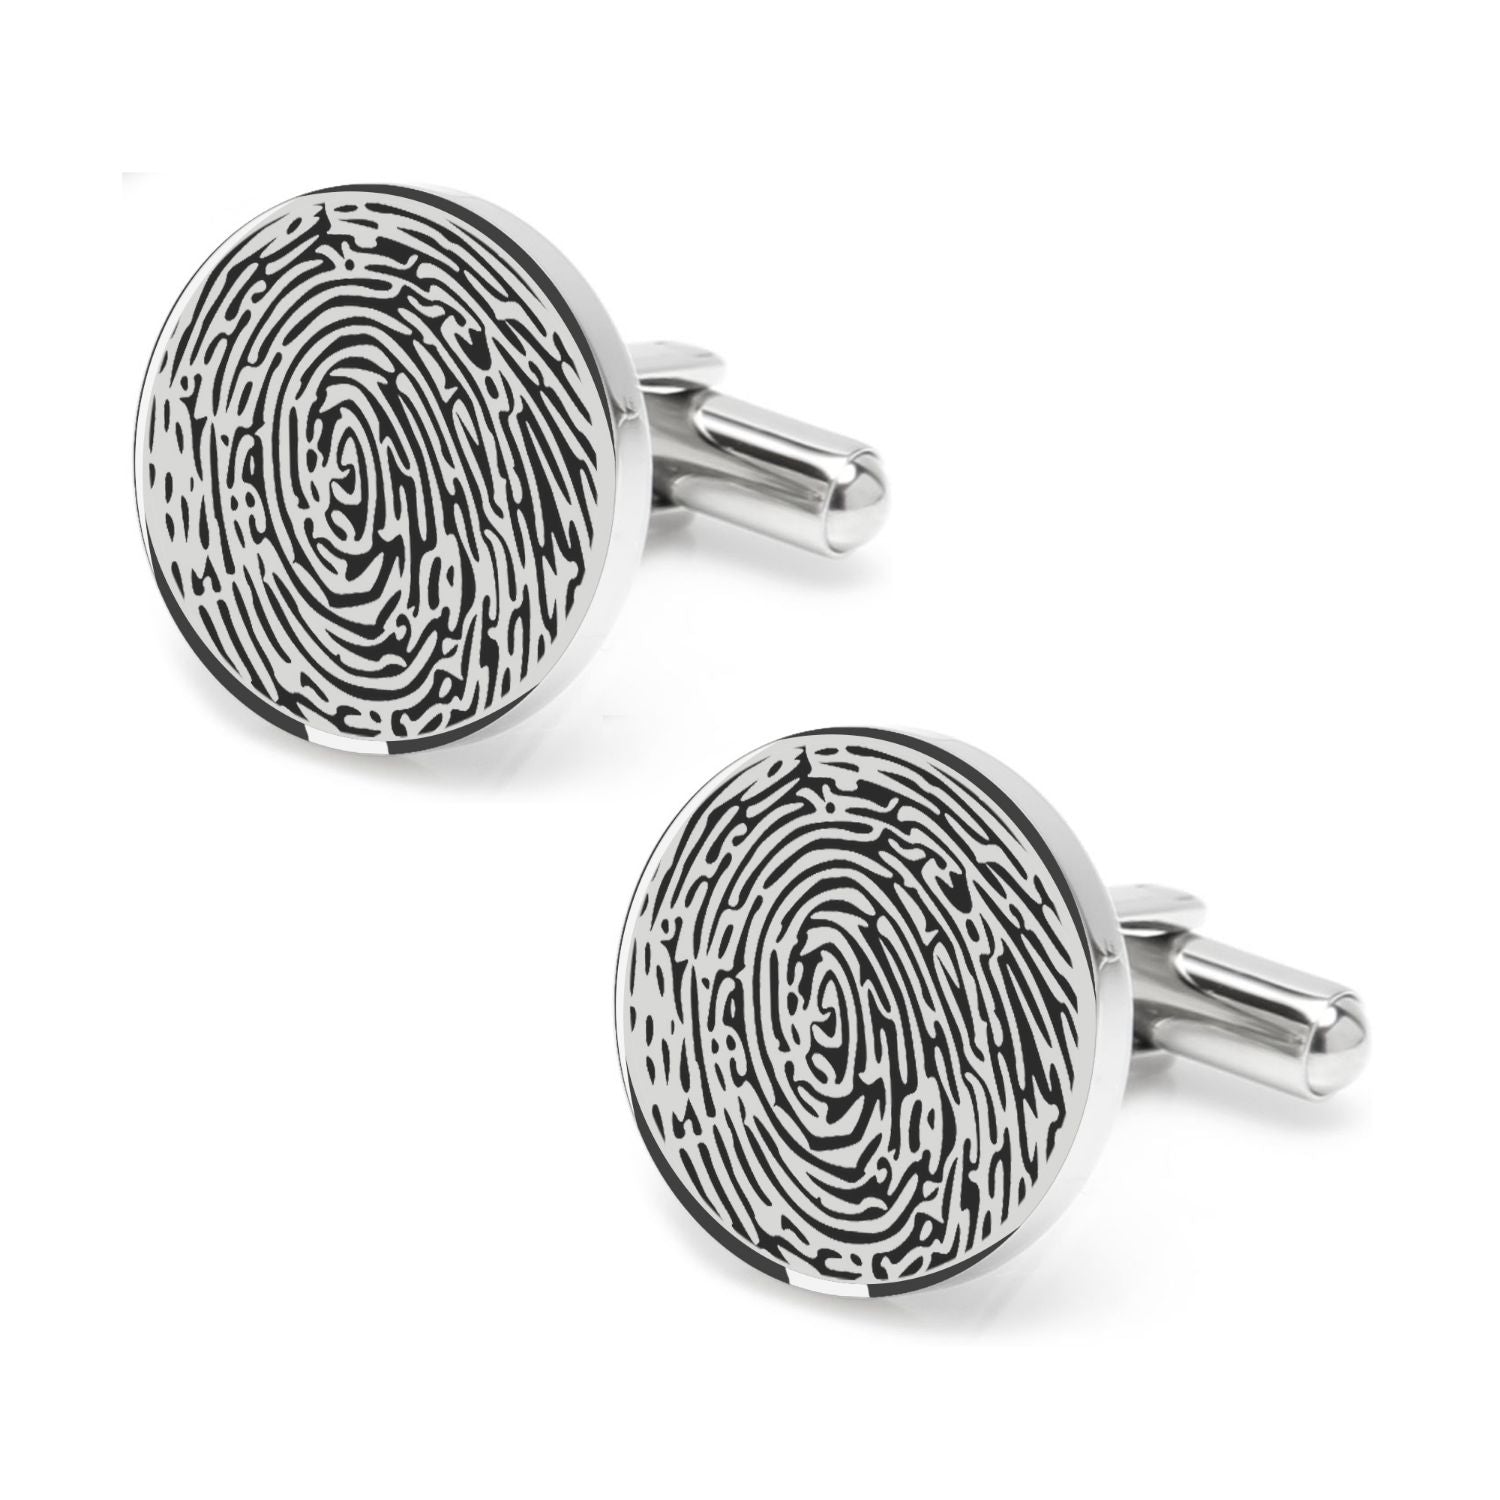 Personalised Customised 925 Sterling Silver Fingerprint Round Shaped Cufflink for Men and Boys